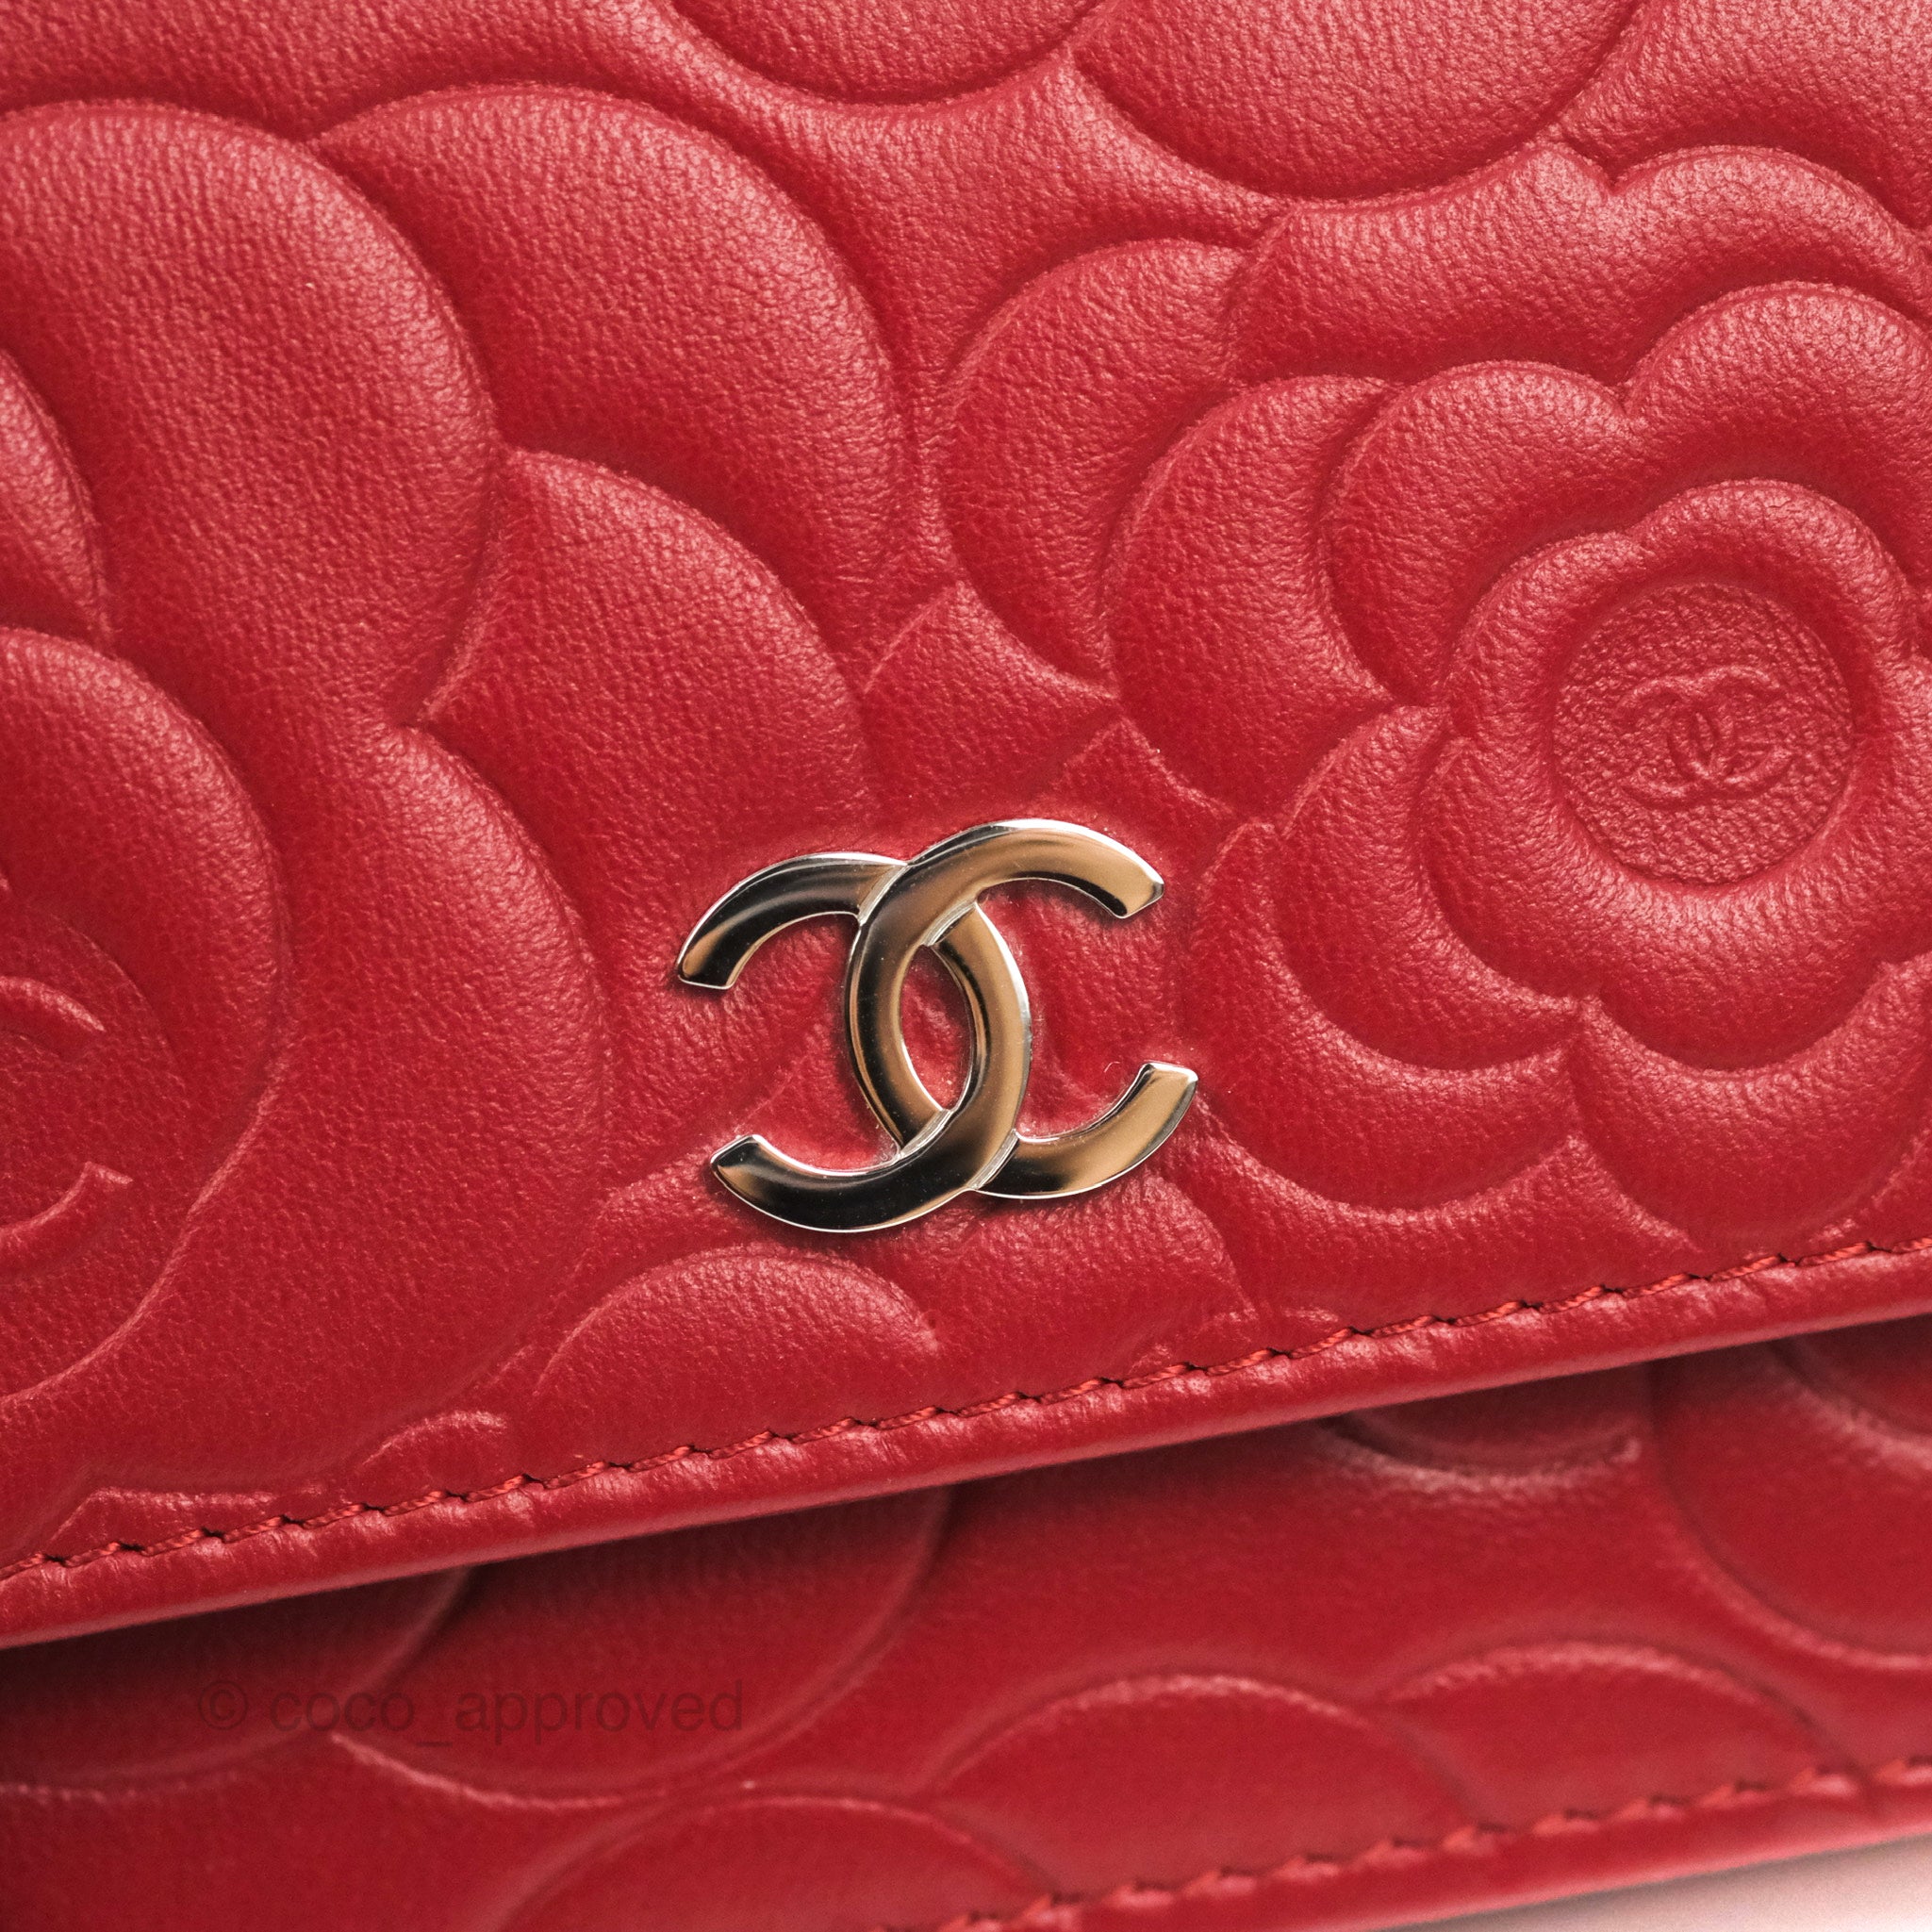 Chanel Camellia Embossed Wallet on Chain